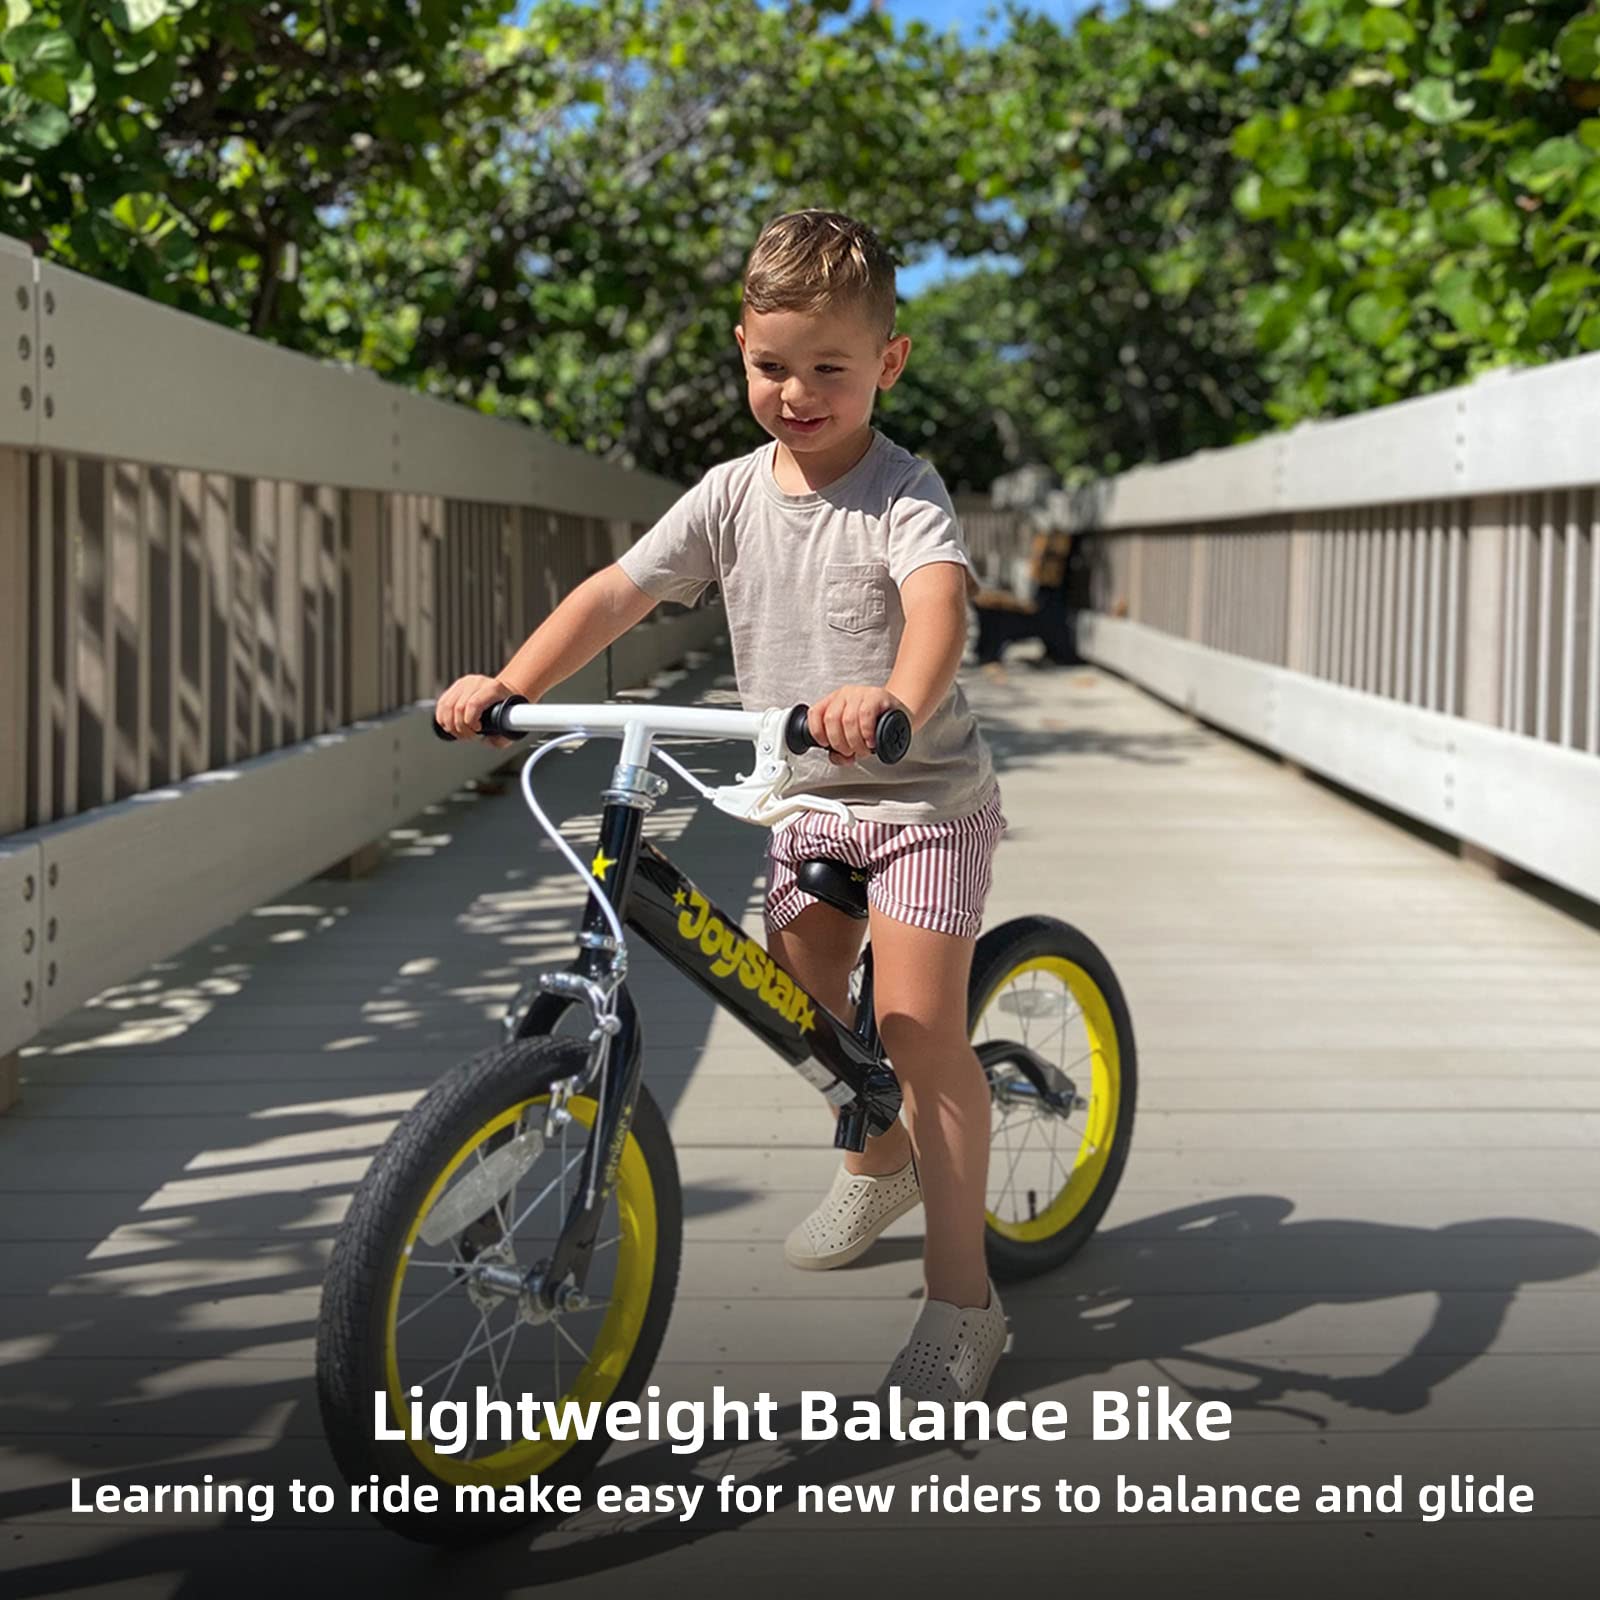 JOYSTAR 14/16 Inch Balance Bike for Toddlers and Kids Ages 3-8 Years Old Boys and Girls - Sport Kids Balance Bike with Handbrake - No Pedal Training Bicycle